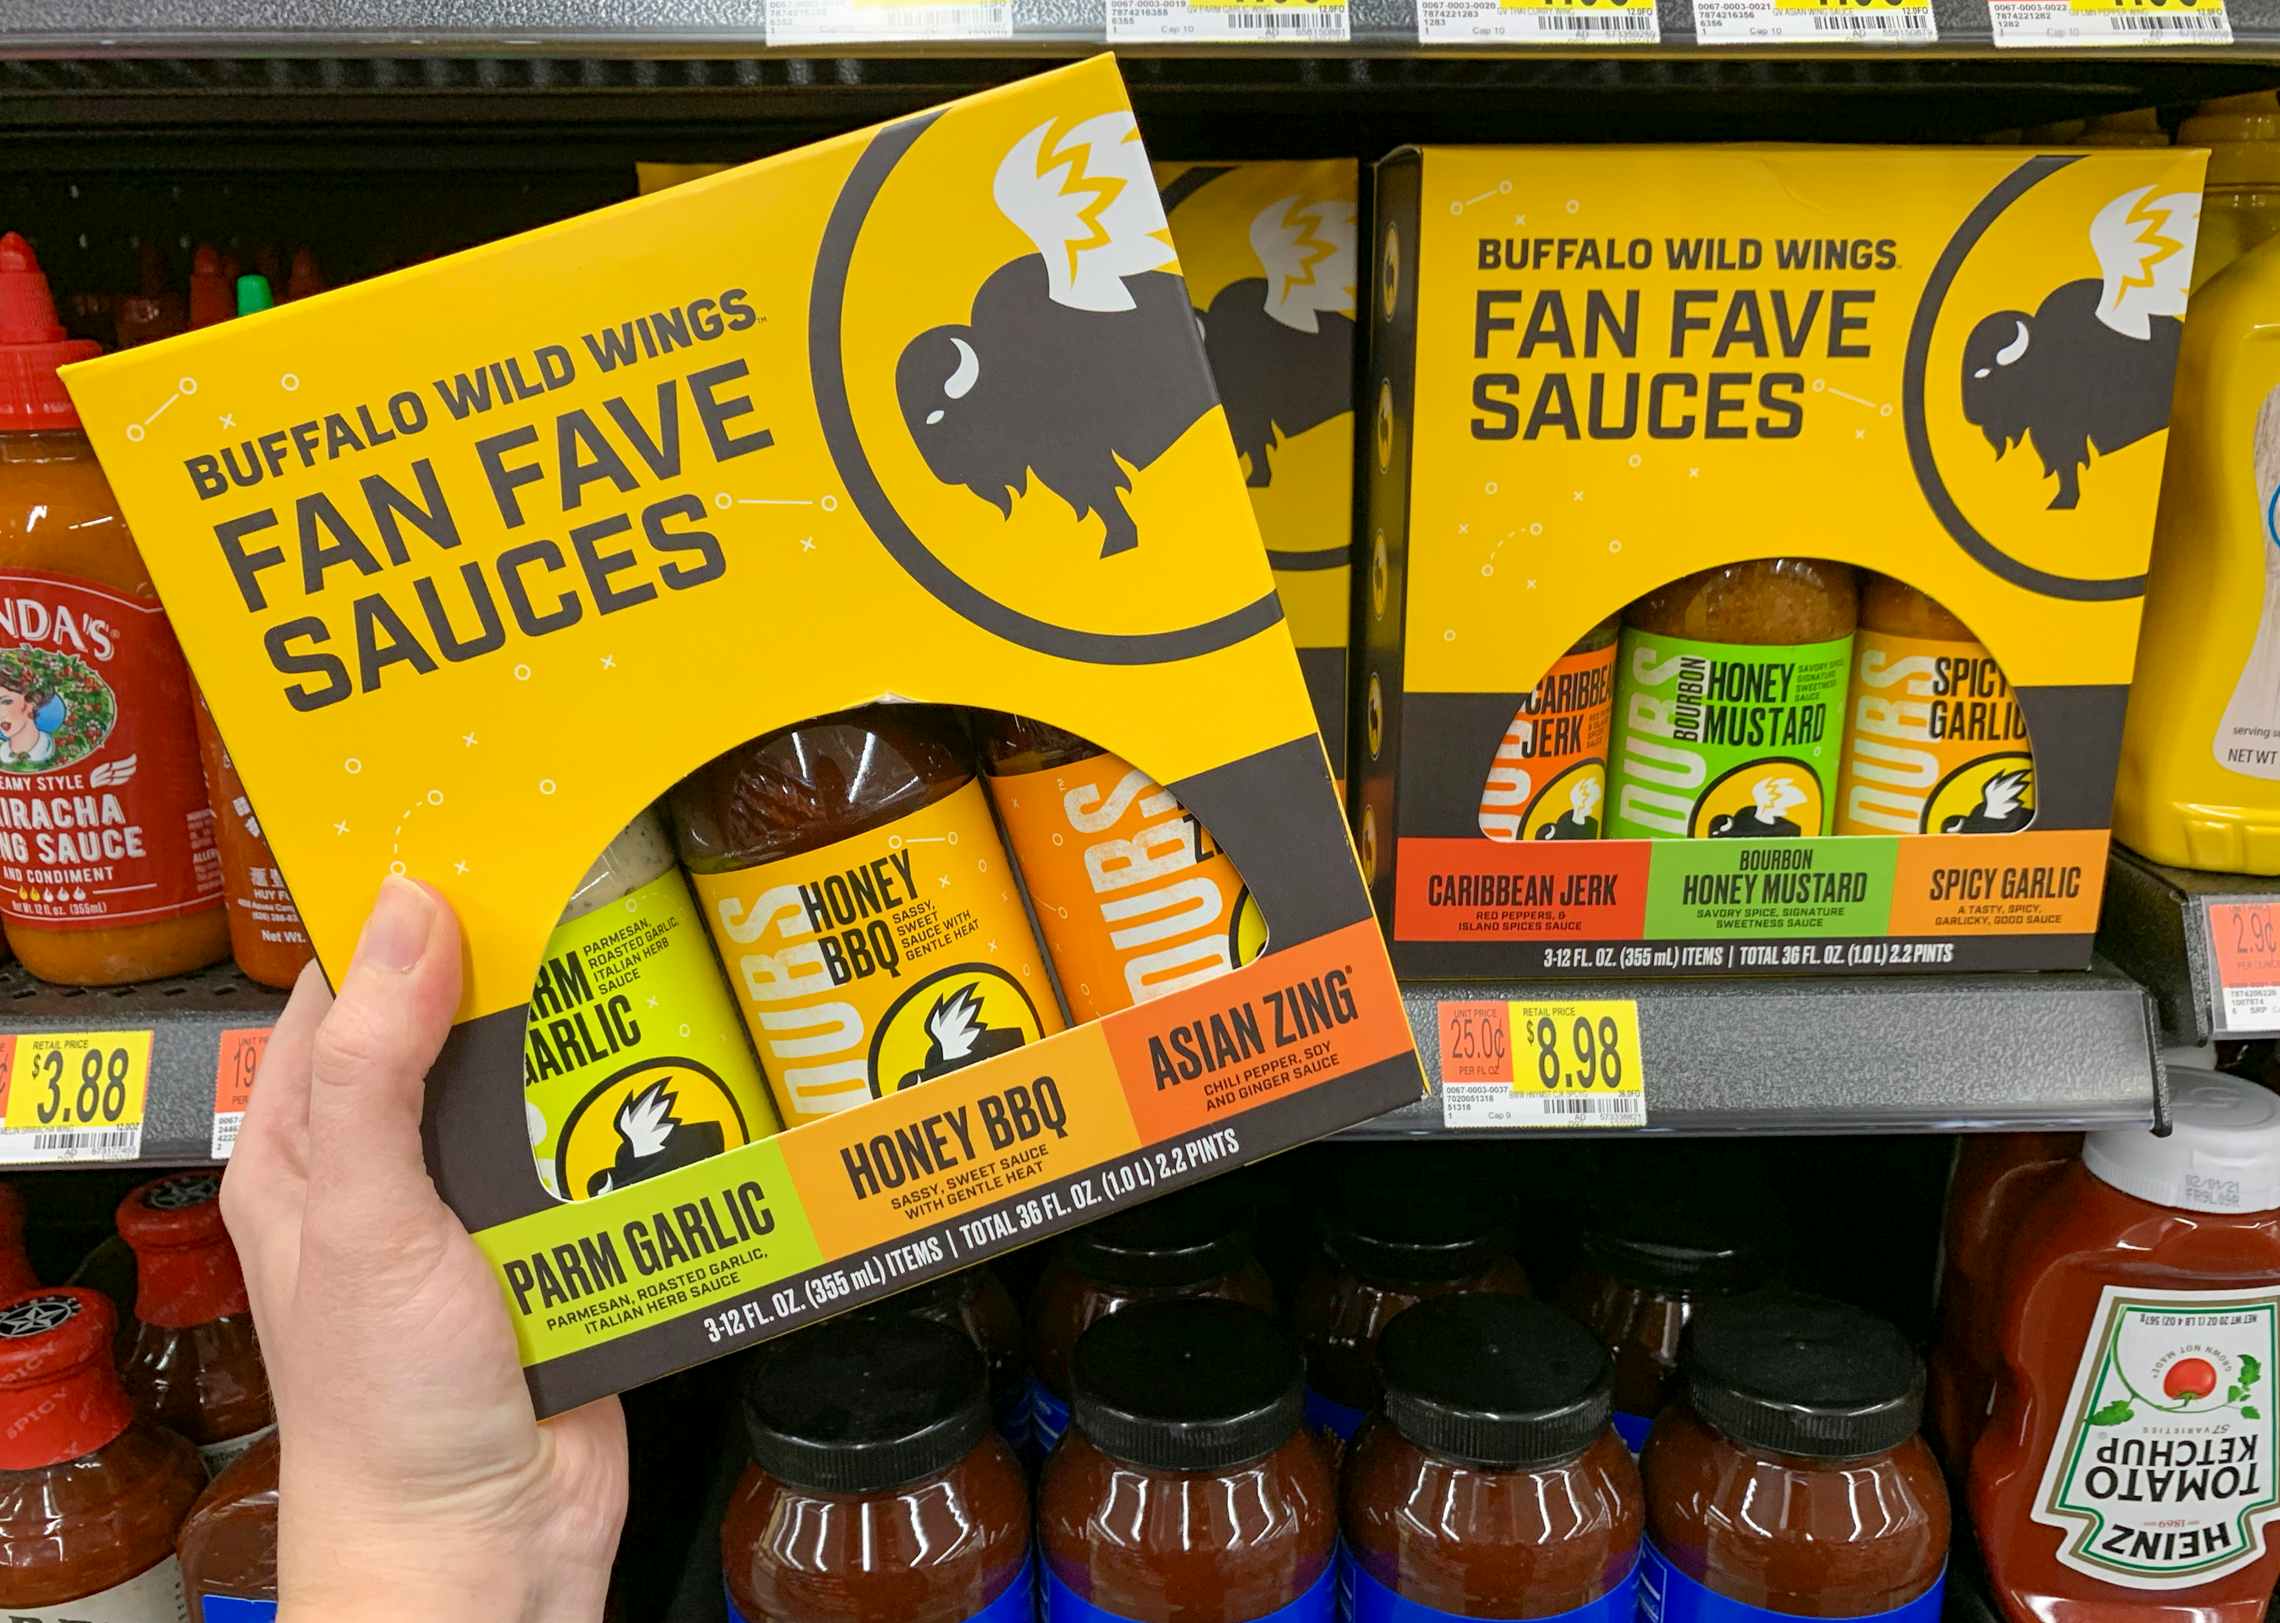 A person holding Buffalo Wild Wings Fan Fave Sauces - a three pack of sauces including Parm Garlic, Honey BBQ, and Asian Zing - in front of a shelf with more of the same product at Walmart.